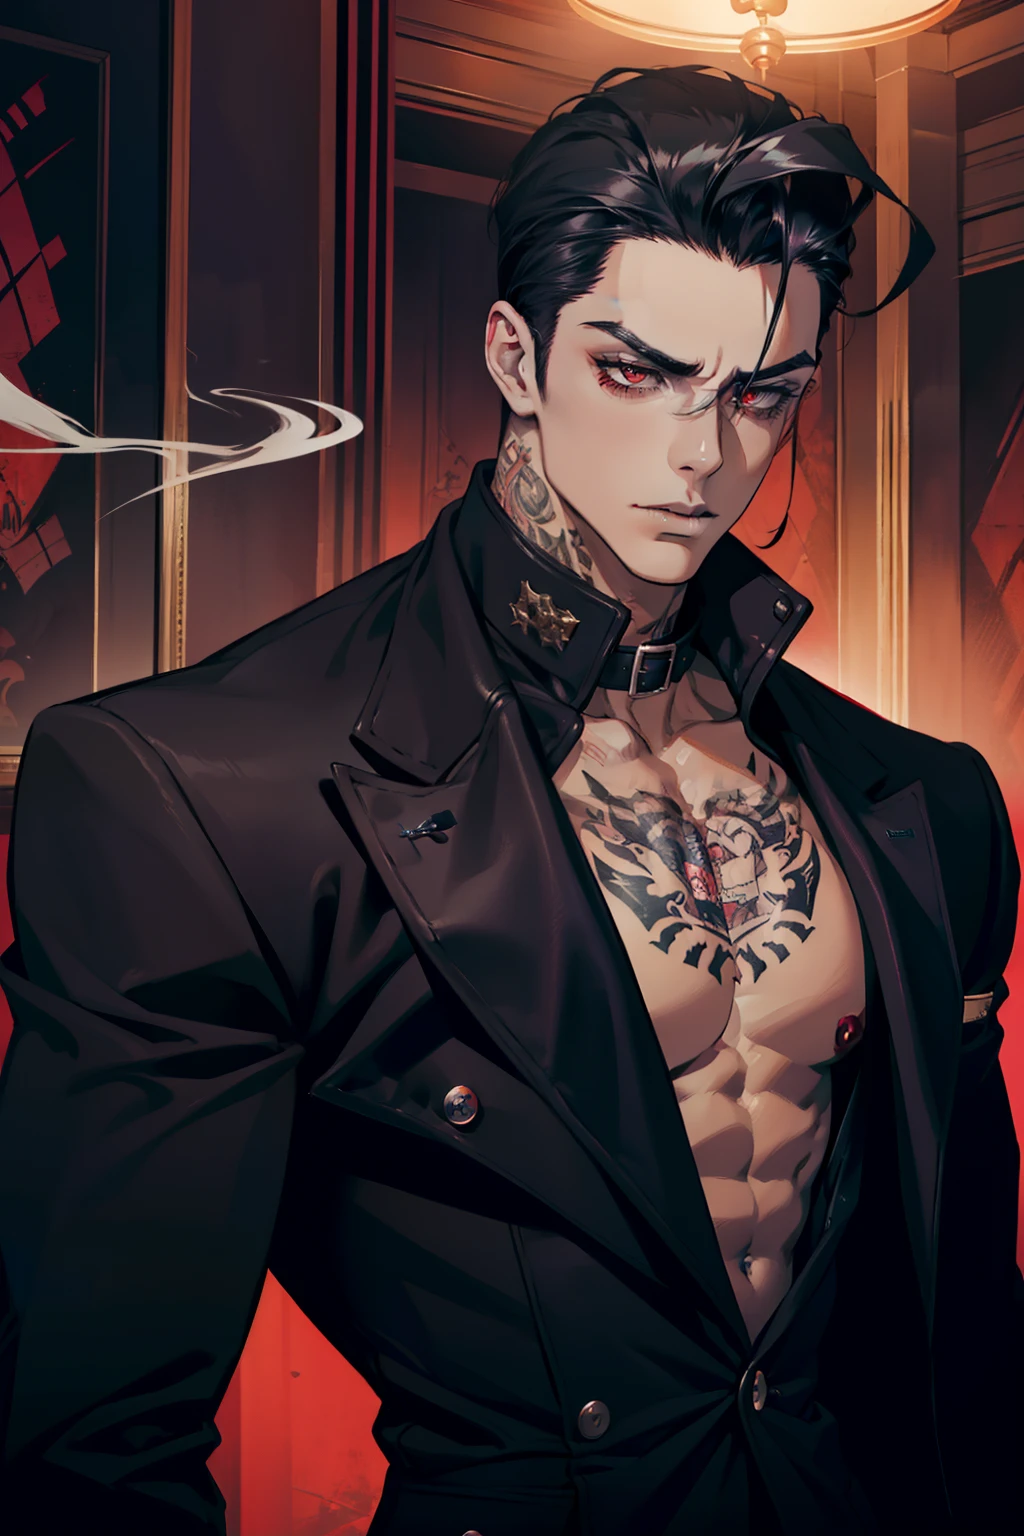 Male Mafia Noir Gambling Vampire dominant alpha gay couple macho sexy handsome demon old men with tattoos big chest big abs slicked back hairstyle smoking red eyes charisma unbutton outfit with abs goth perfect face structure detailed stylized black leather coat